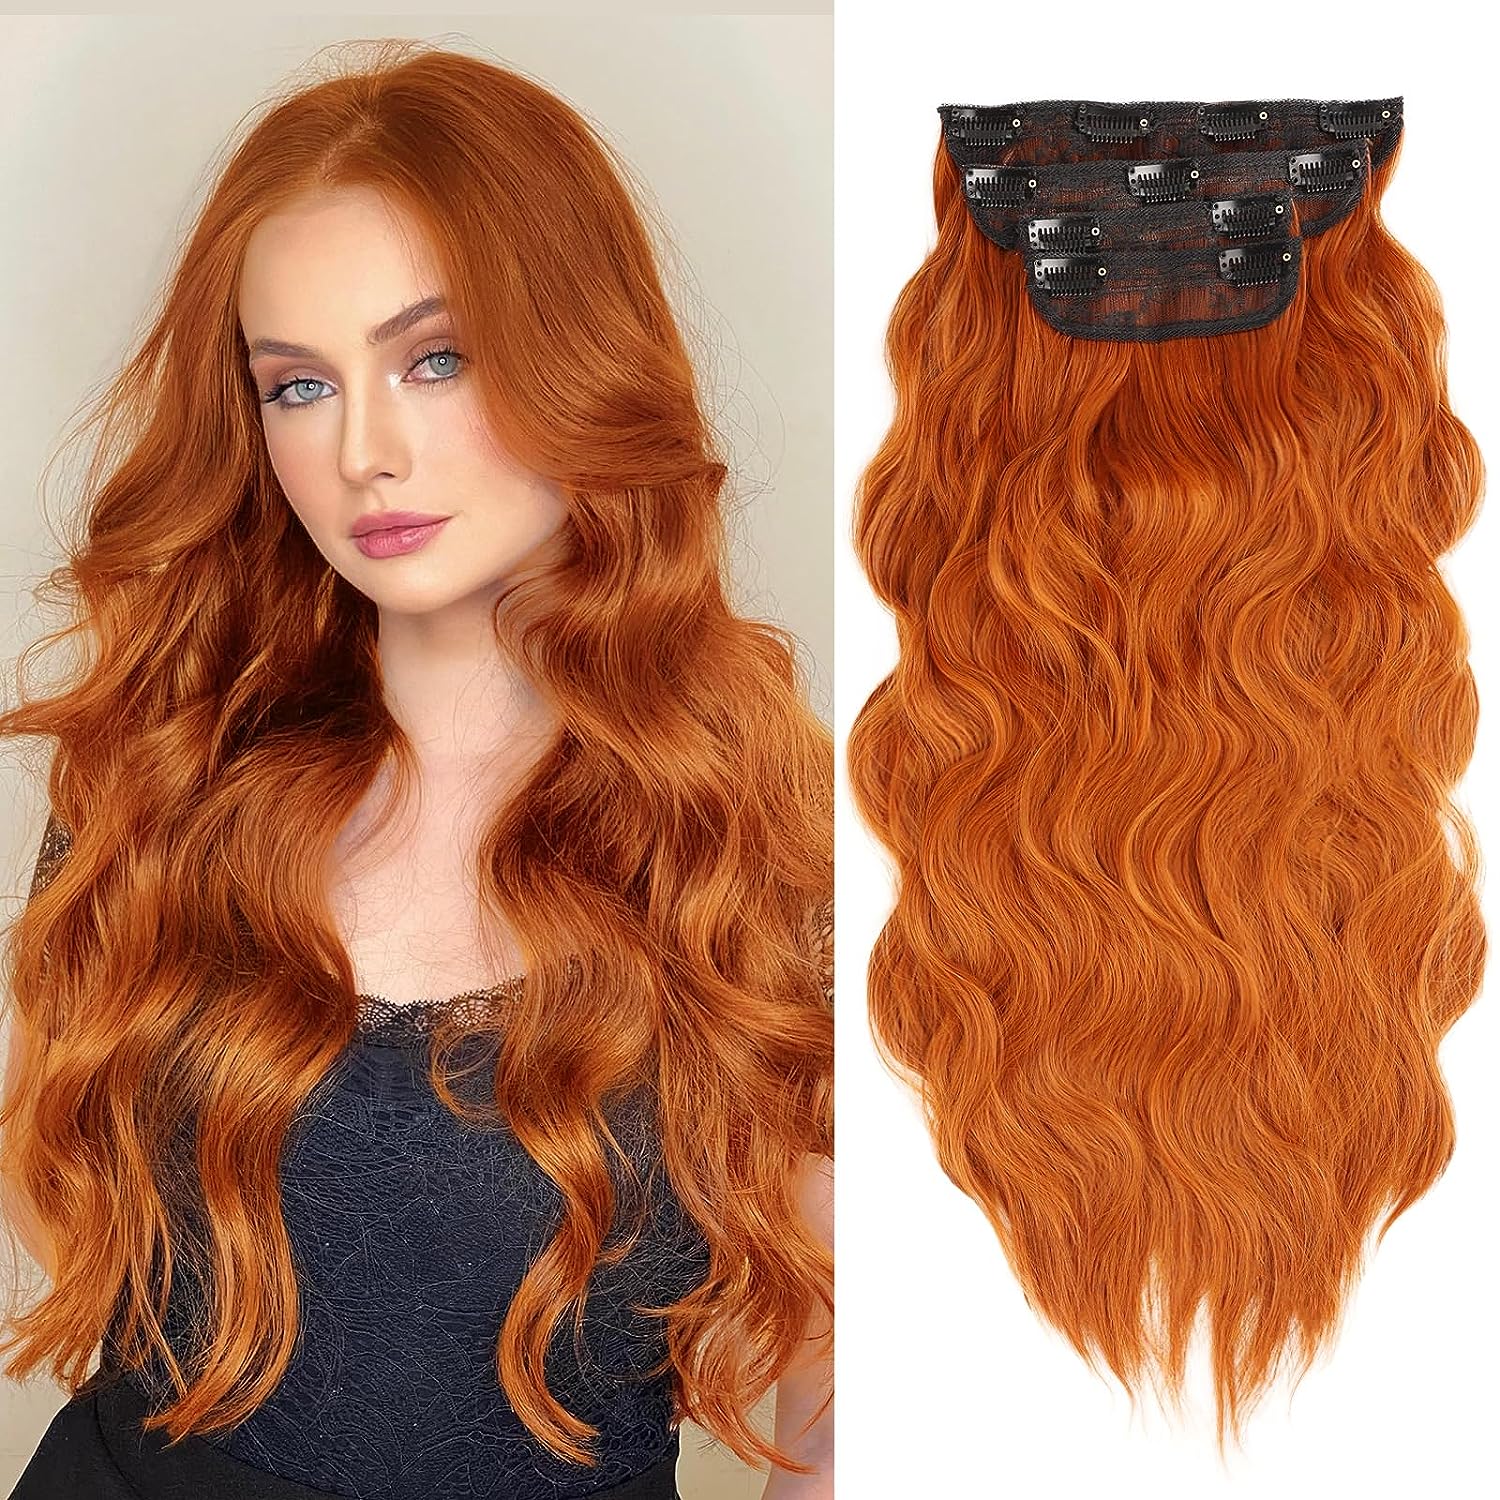 Clip in Hair Extensions, 20 Inch Copper Red Hair [...]